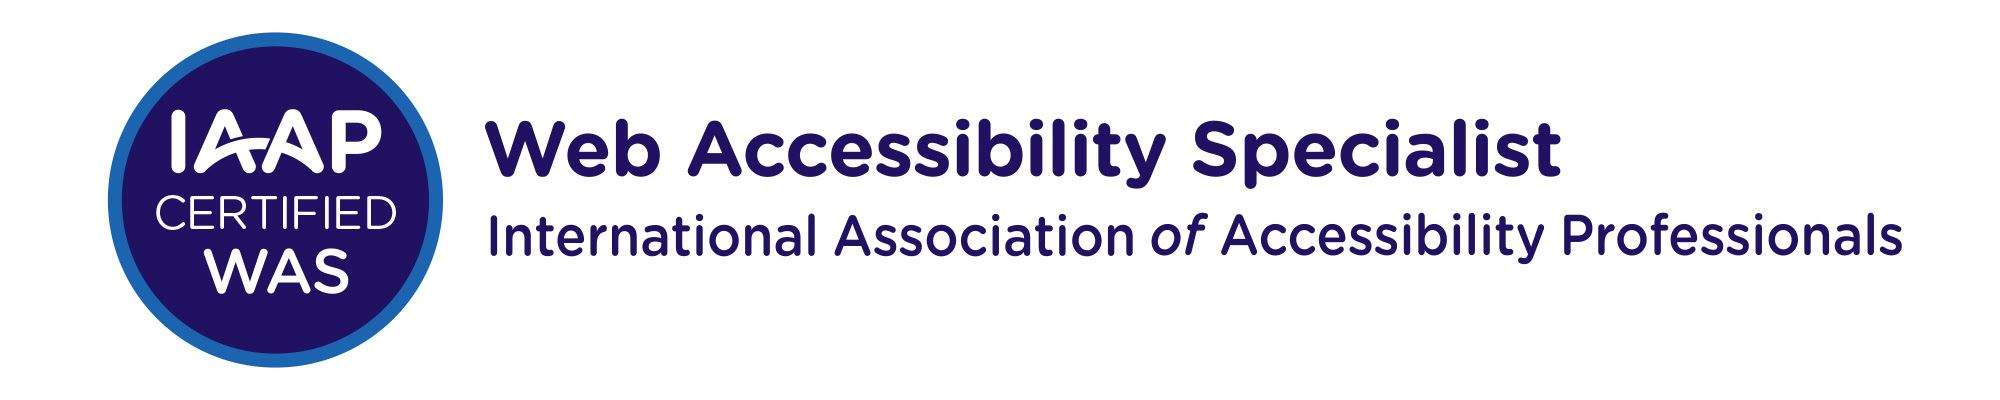 IAAP Certified Web Accessibility Specialist